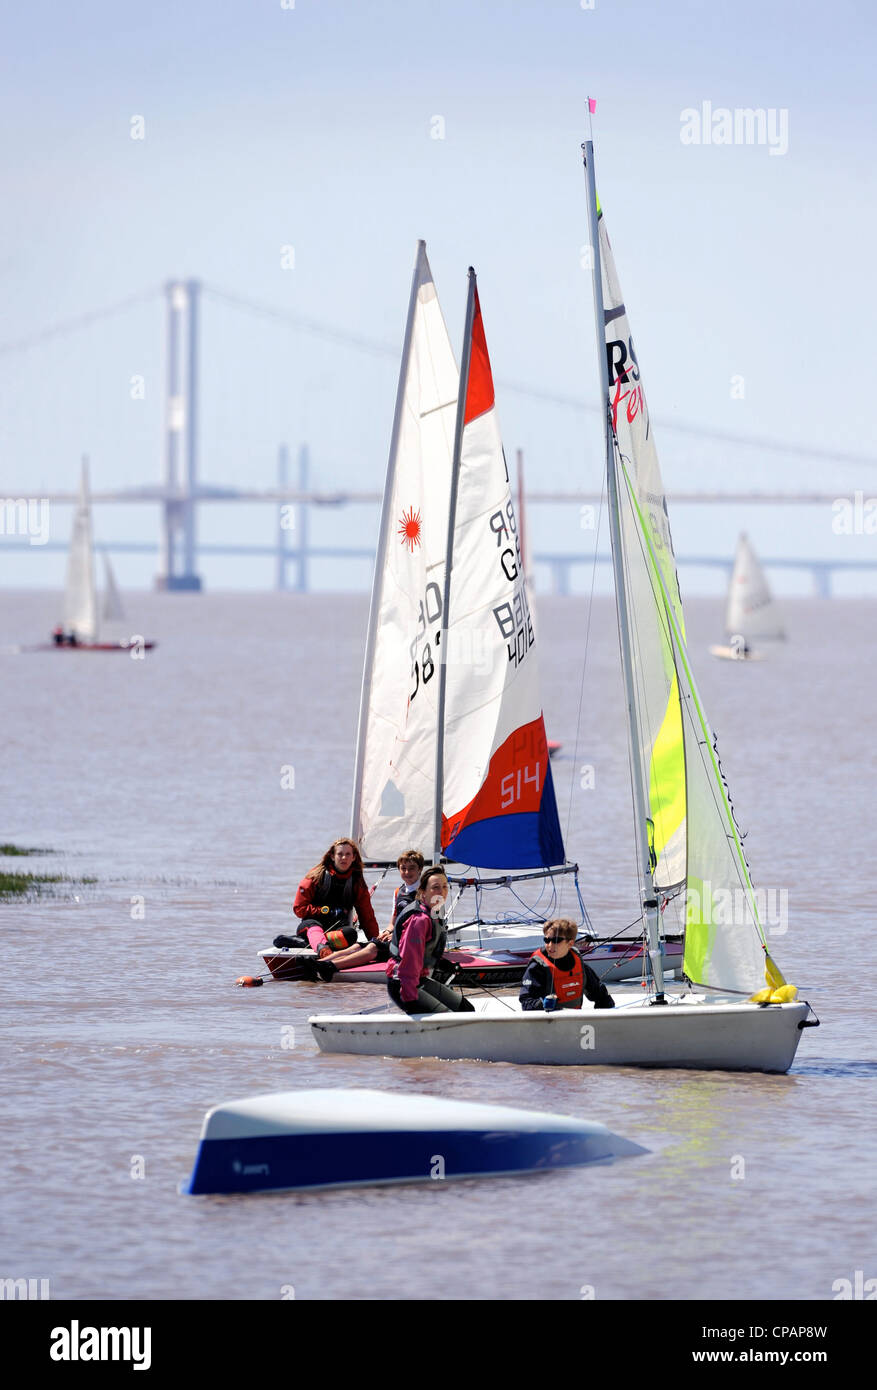 Sailers approach an upturned boat at a regatta on the River Severn with the first Severn Bridge nearest and second Severn crossi Stock Photo